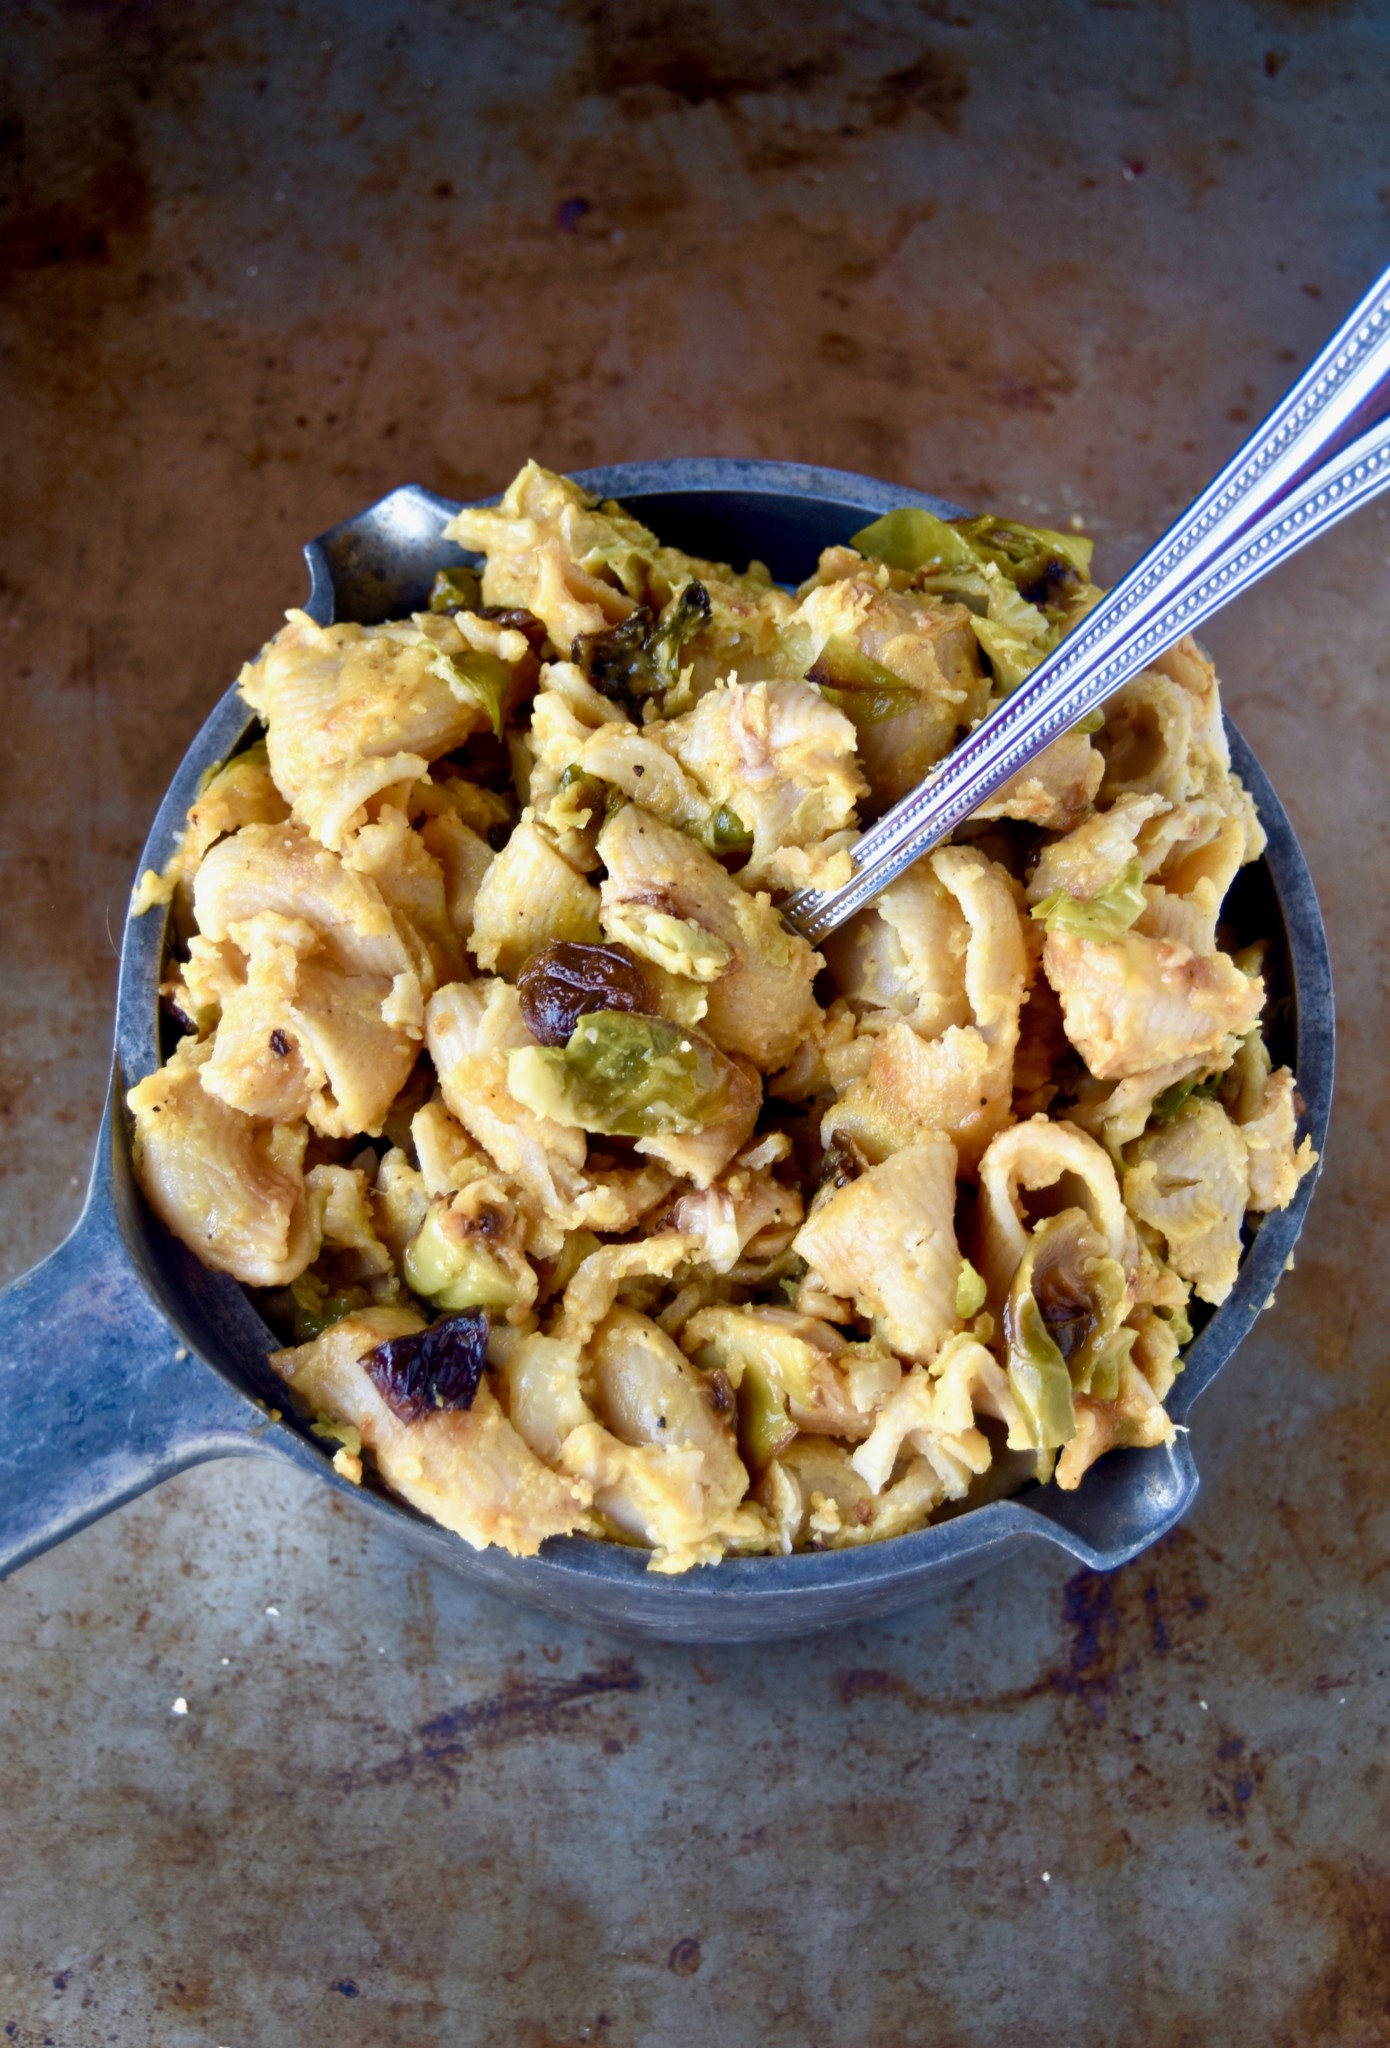 baked pumpkin mac and cheese with roasted brussel sprouts - a delicious, autumnal twist on a classic // cait's plate